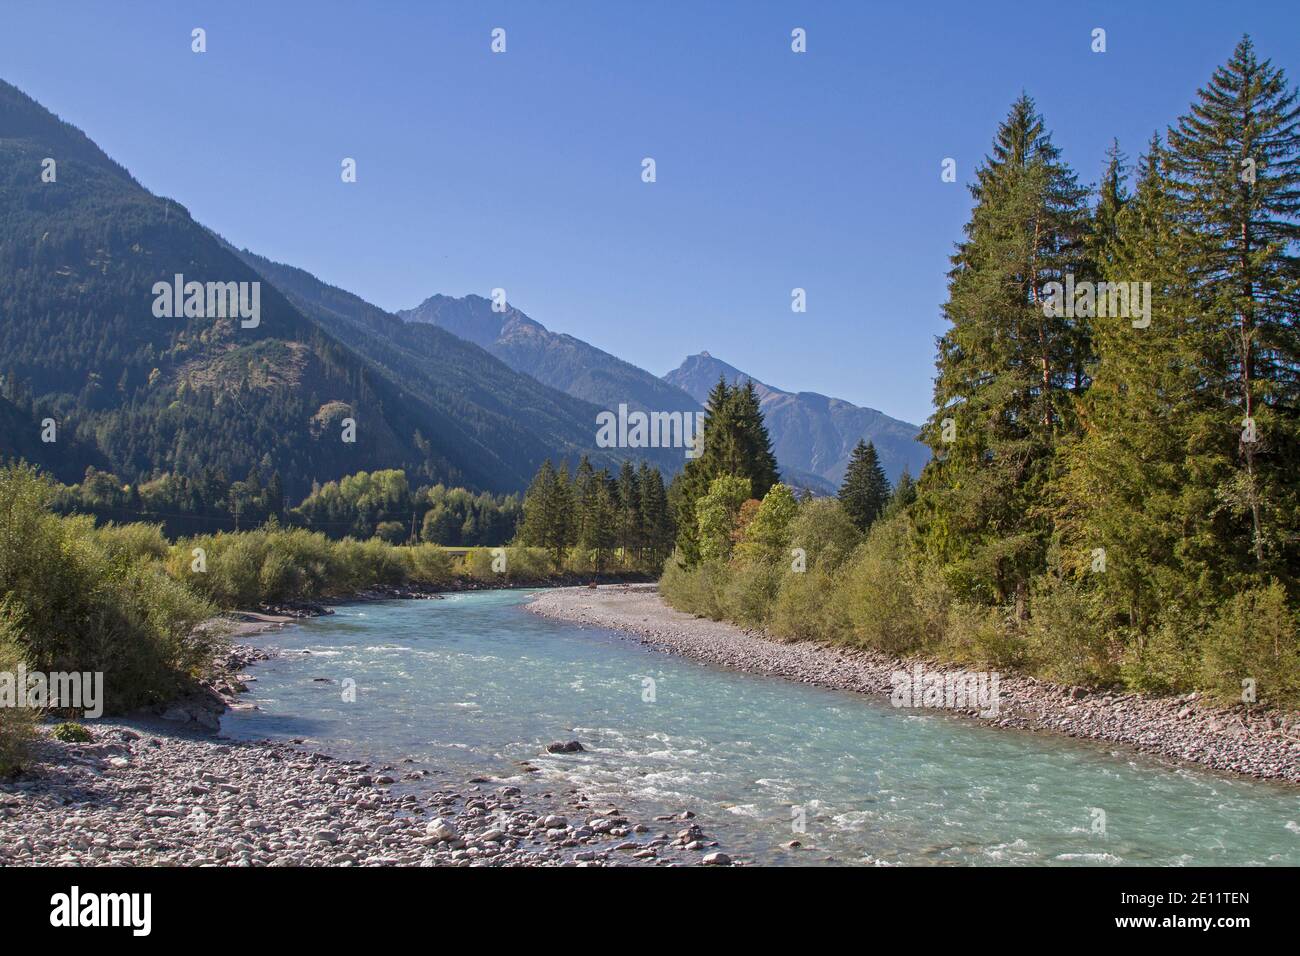 The Imposing Broad River Valley Of The Lech In Tyrol Was Designated Natuschutzgebiet And Is Called Naturpark Tiroler Lech Stock Photo